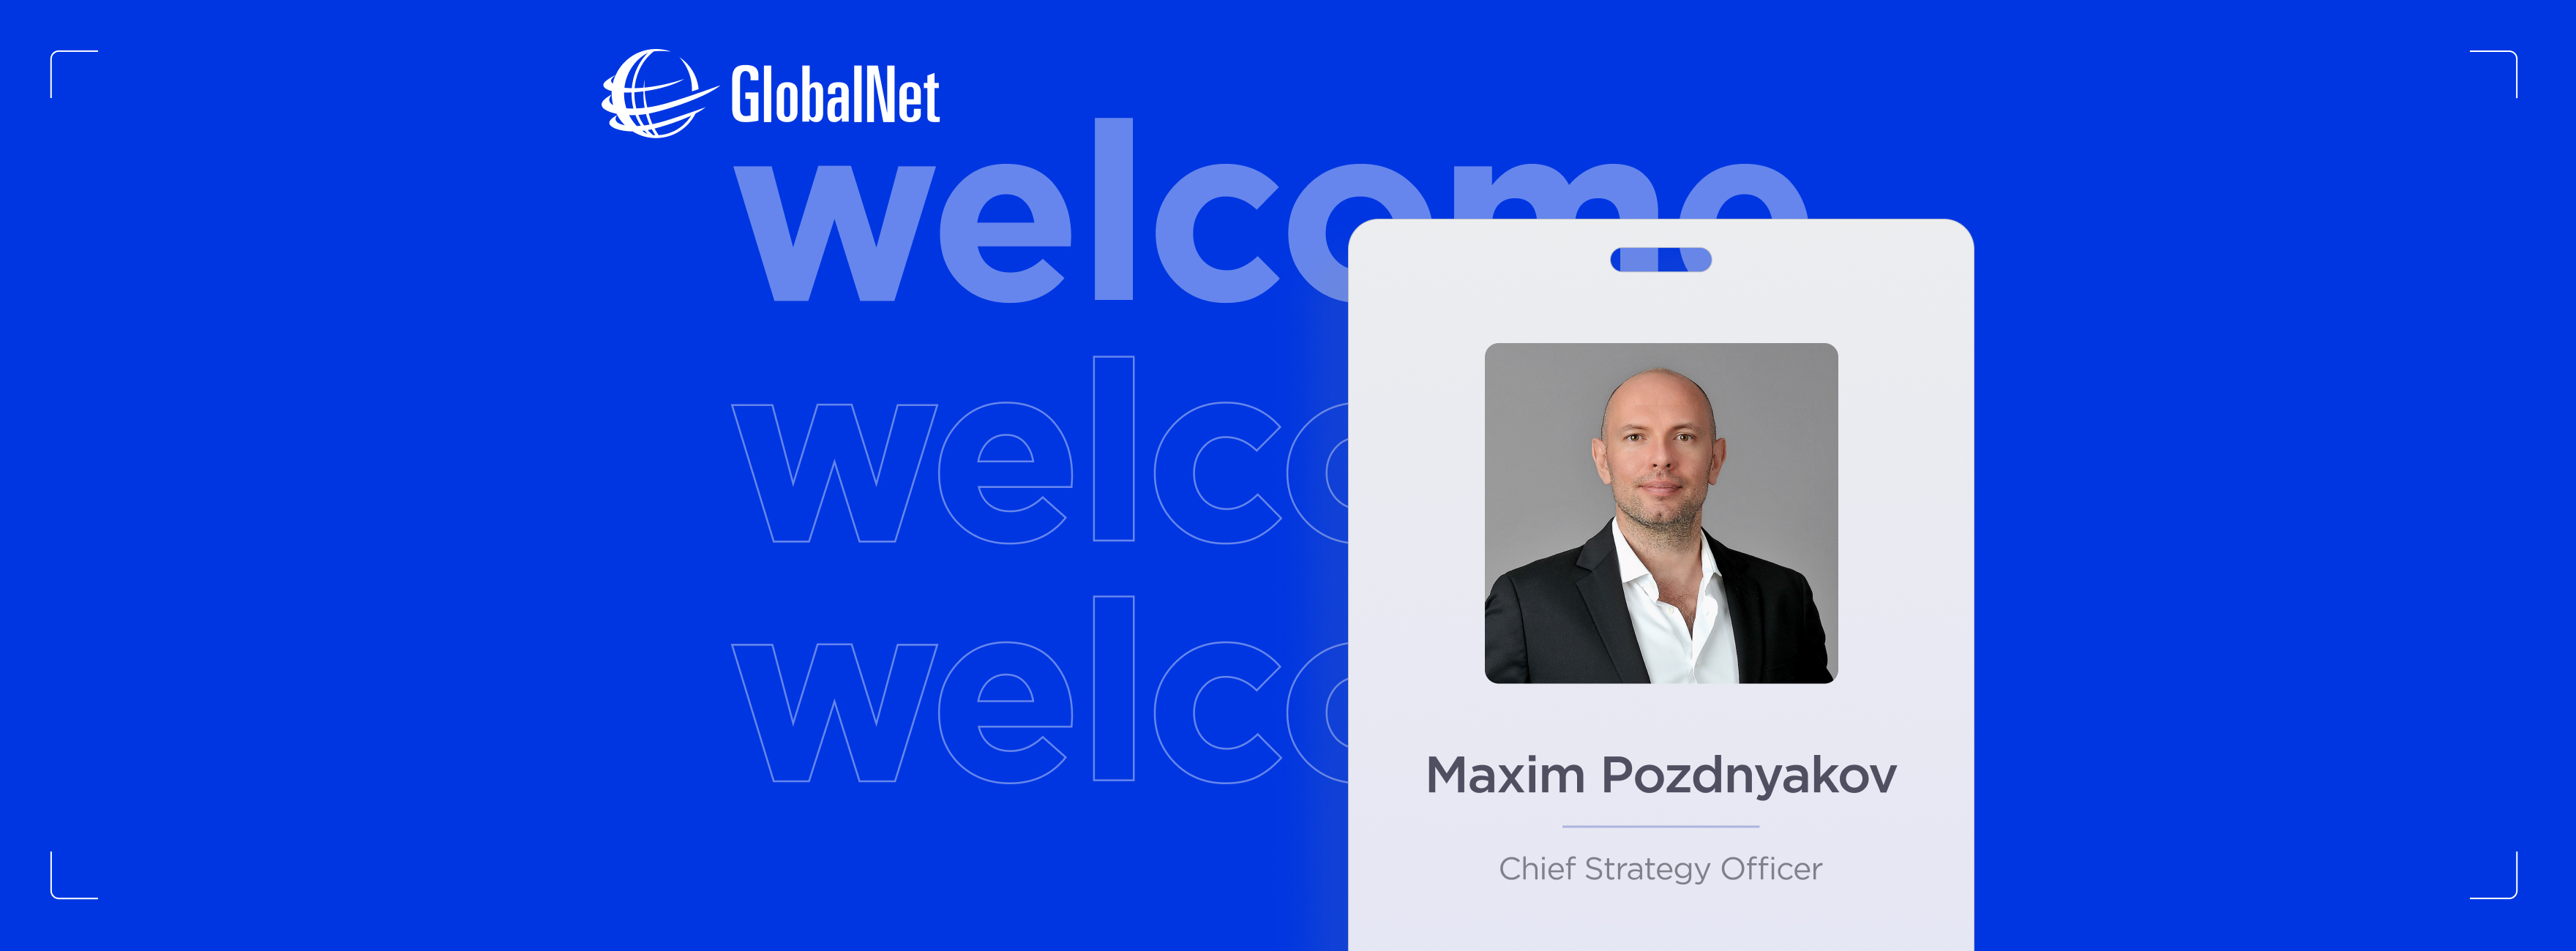 Welcoming Our New Chief Strategy Officer and Expanding Our International Team